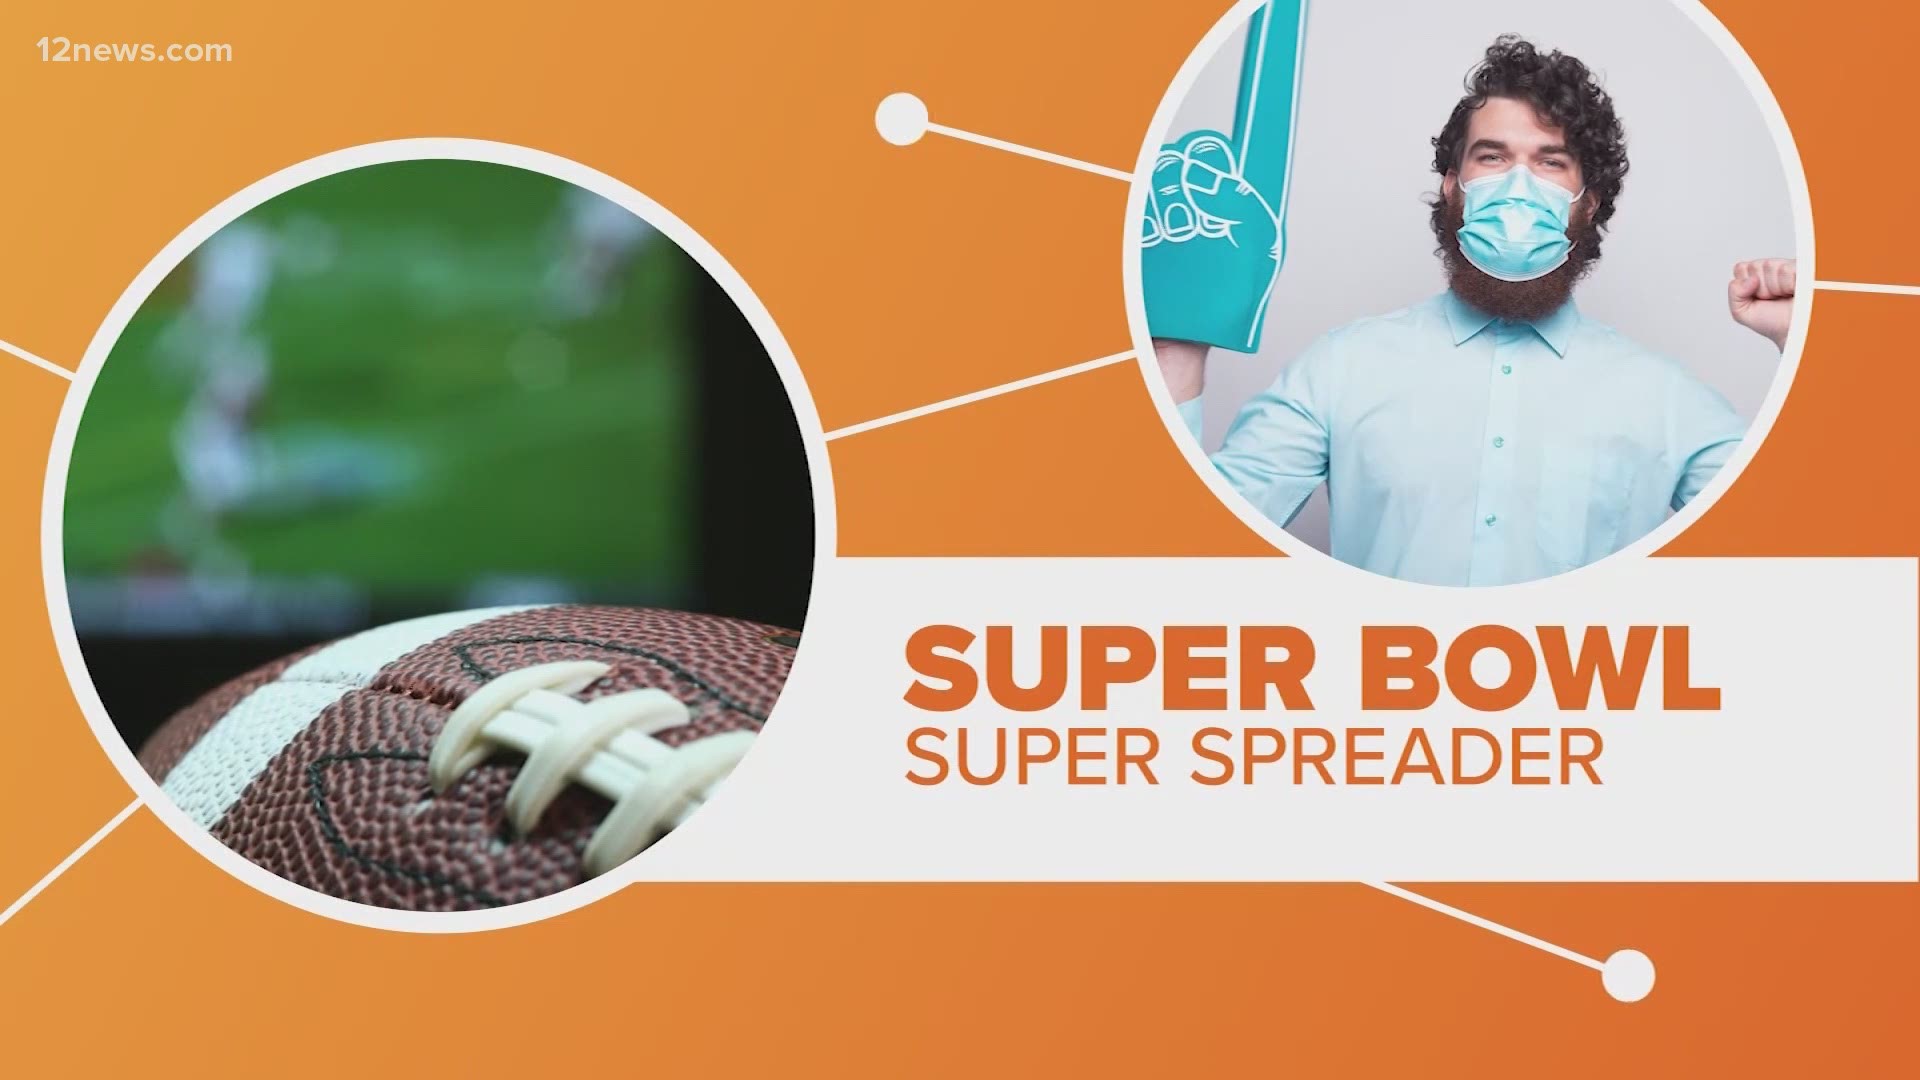 In today's COVID-19 landscape, it's important to avoid large gatherings and "super spreader" events. Here's how to safely watch the Super Bowl in 2021.